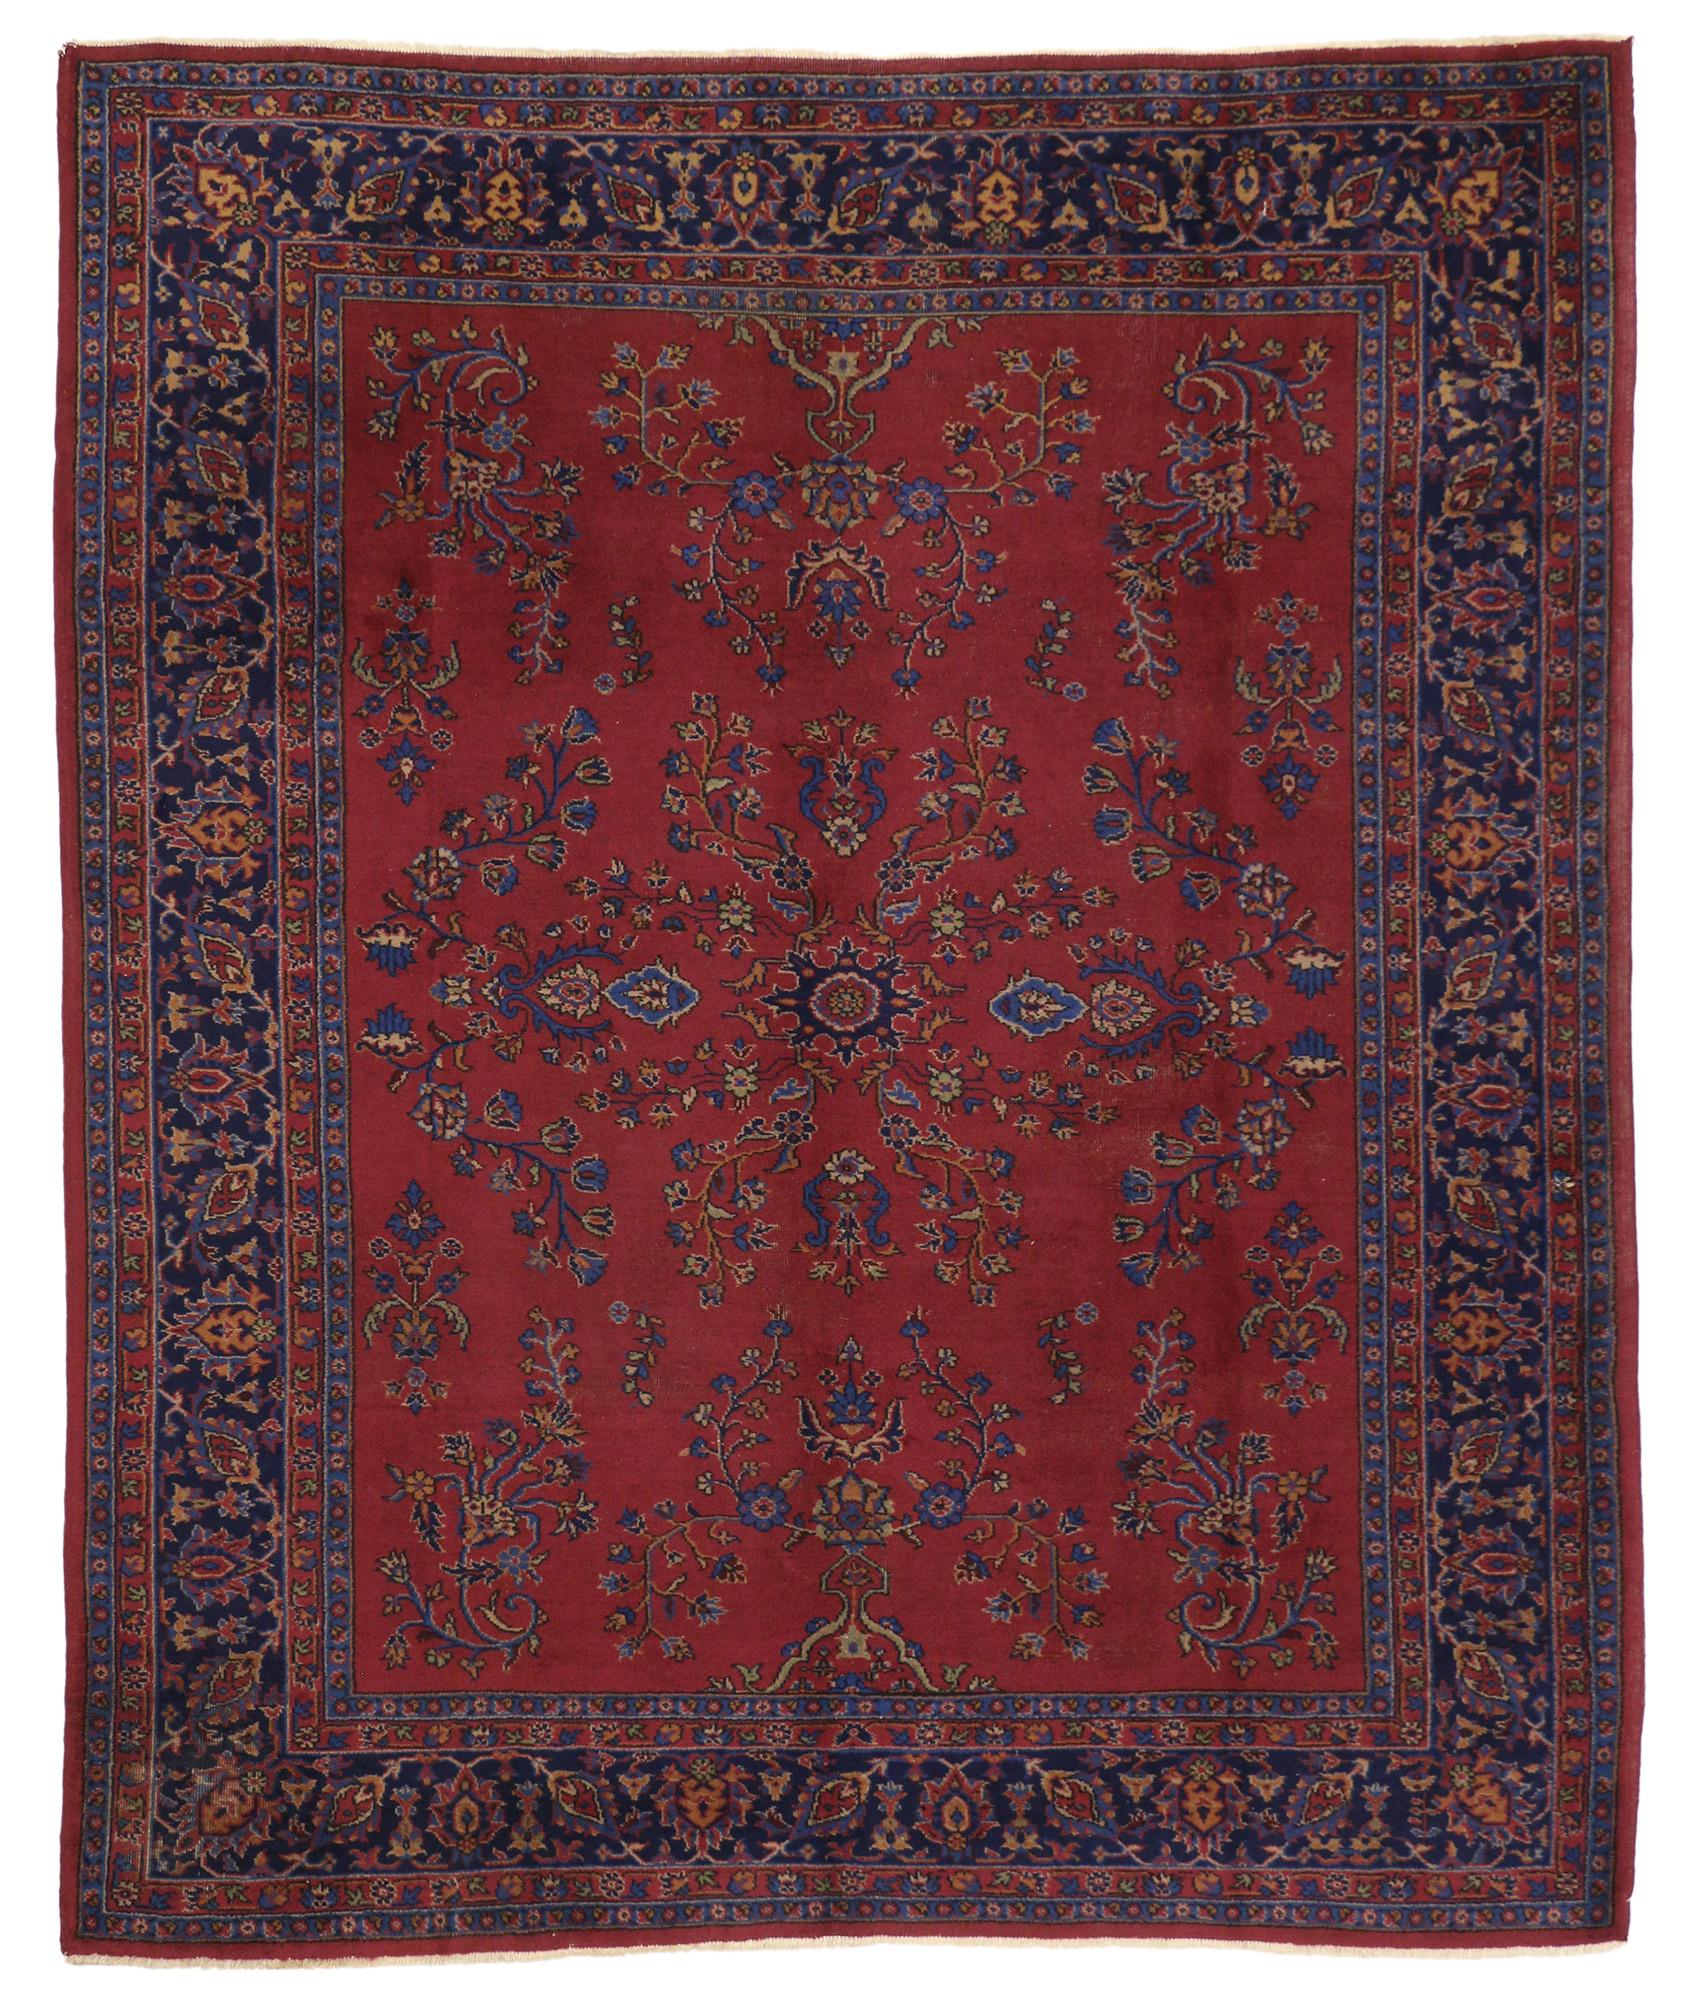 Wool Antique Turkish Sparta Rug, Victorian Exuberance Meets Baroque Opulence For Sale